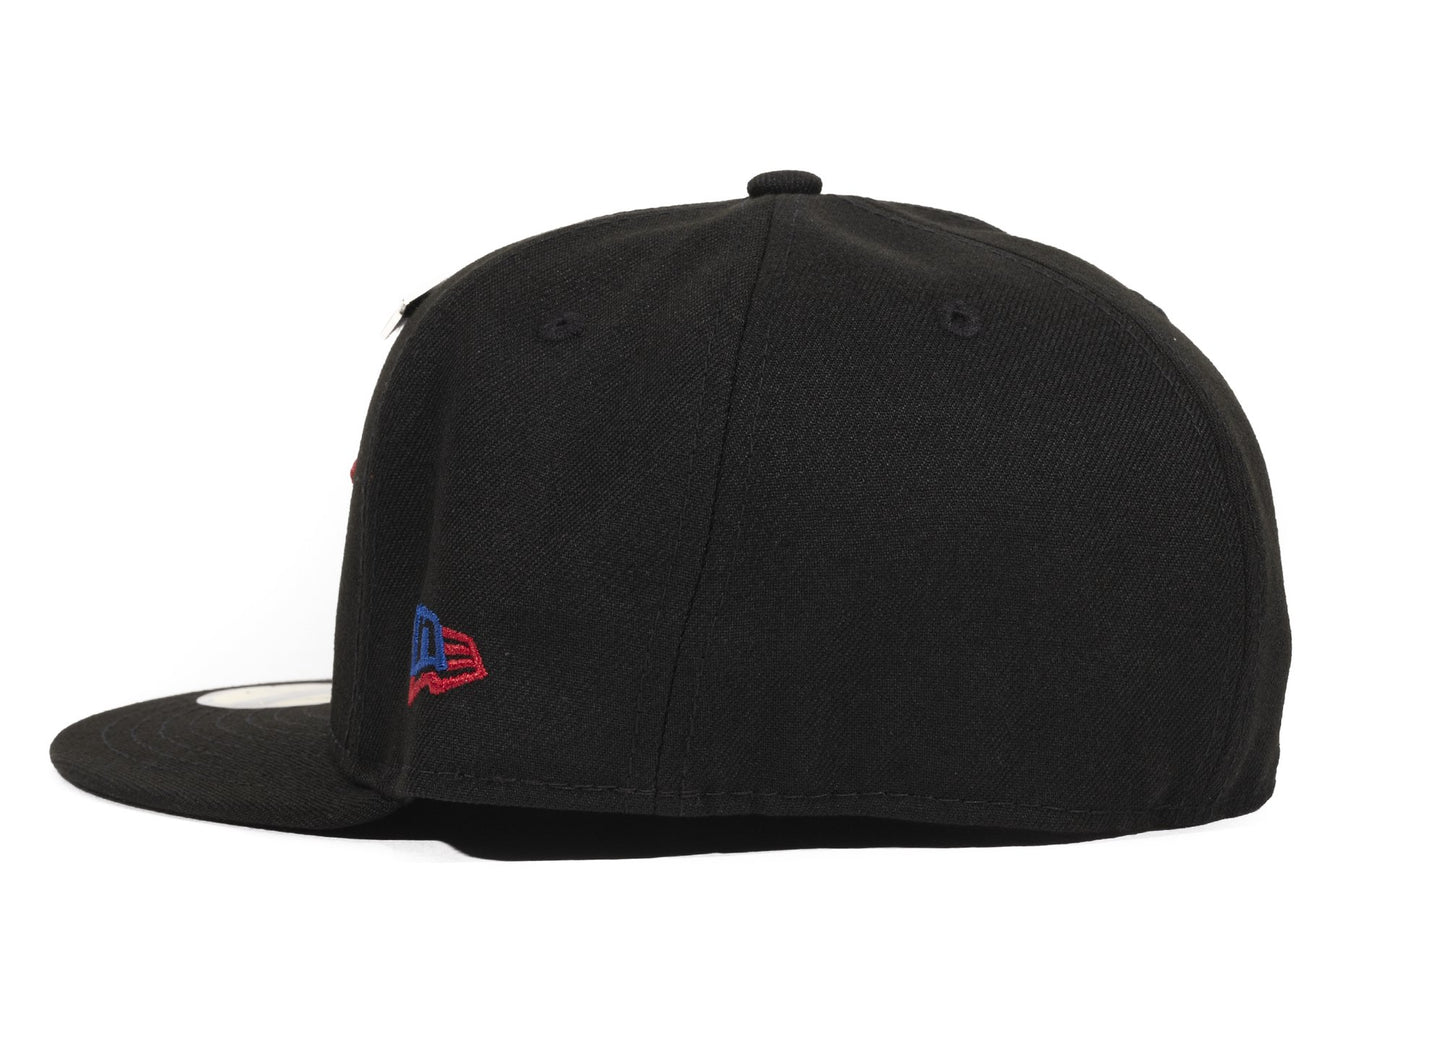 Paper Planes American Dream Black Crown Fitted Hat